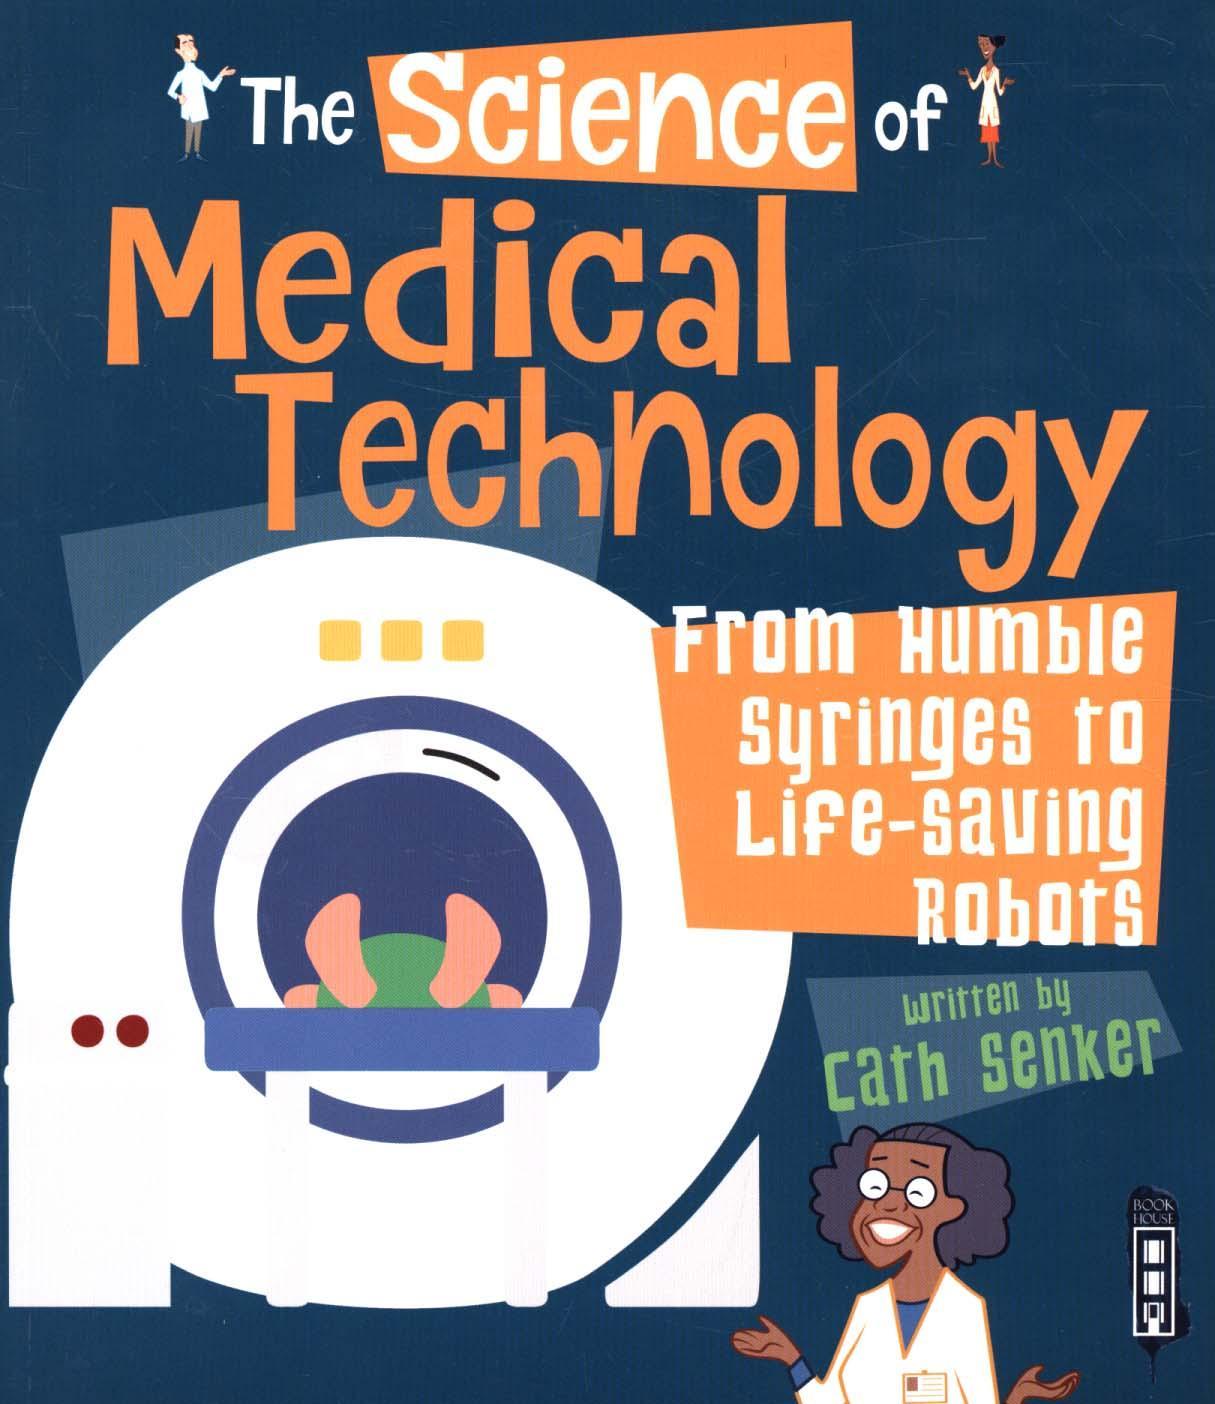 Science of Medical Technology